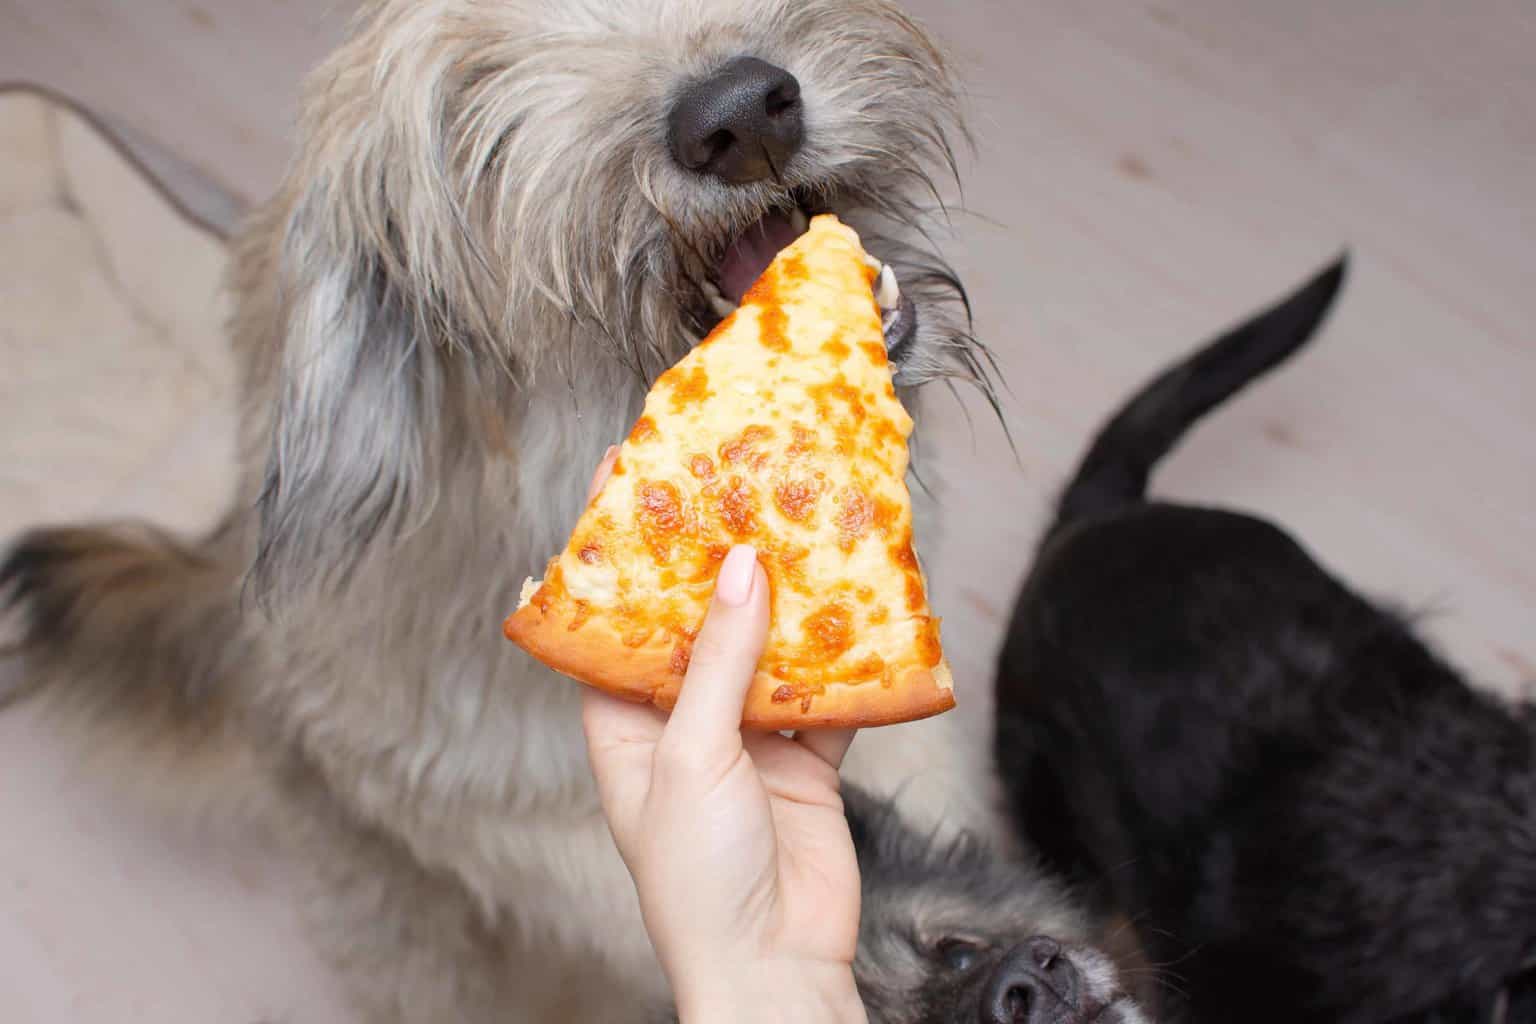 Owner feeds dog slice of cheese pizza. A good rule of thumb if you want to offer your dog a dairy product is to start with something low in lactose, like cheddar cheese or cottage cheese